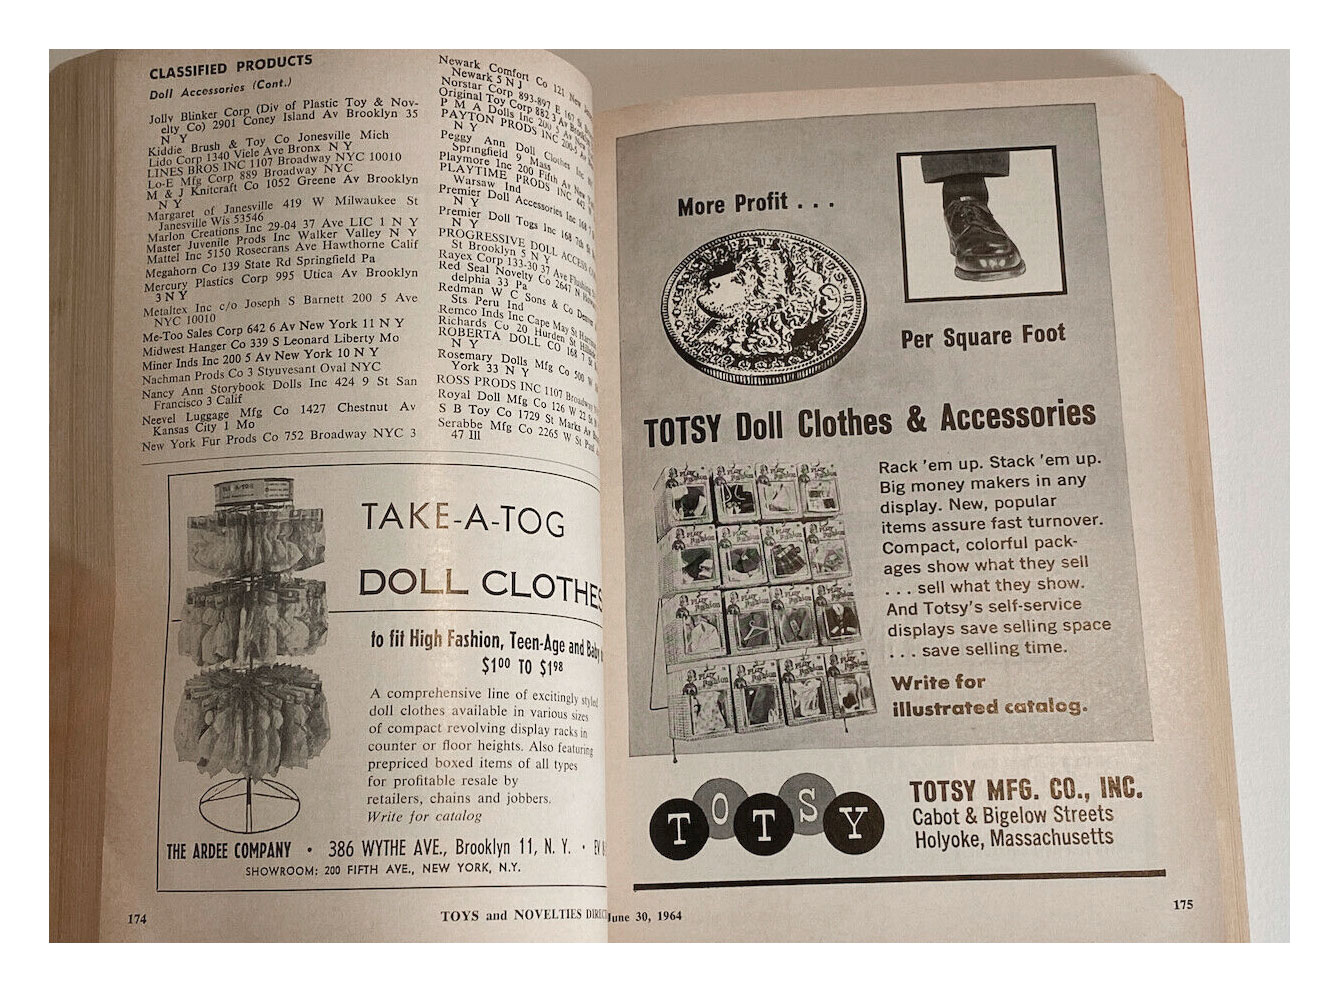 From 1964 Toys and Novelties magazine (June 30)